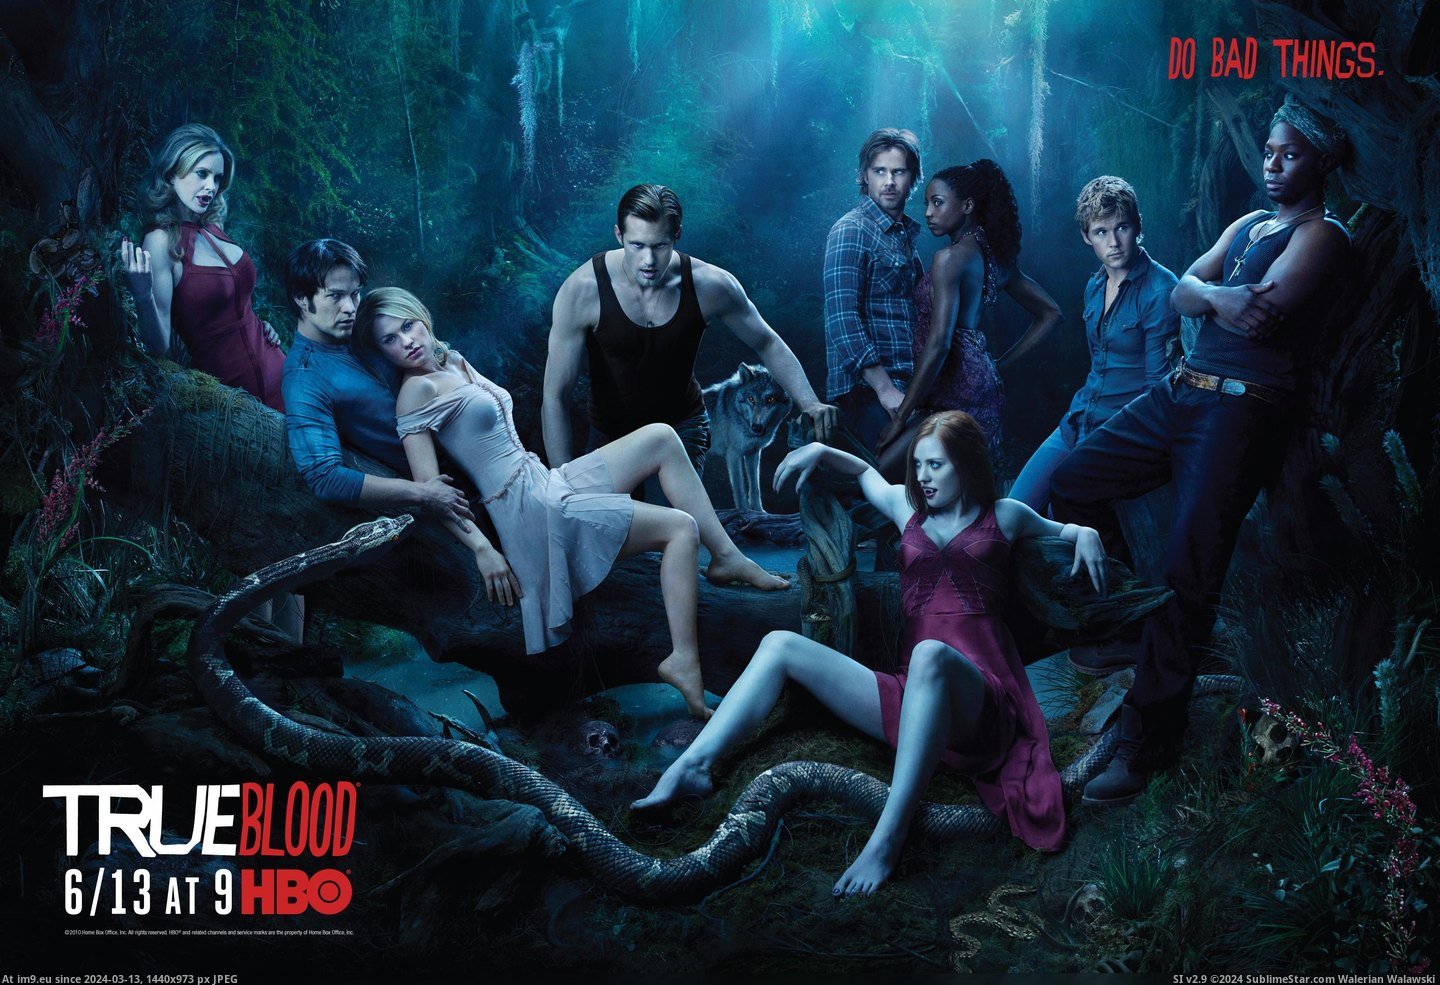 #Show #Blood #True Tv Show True Blood 96342 Pic. (Image of album TV Shows HD Wallpapers))